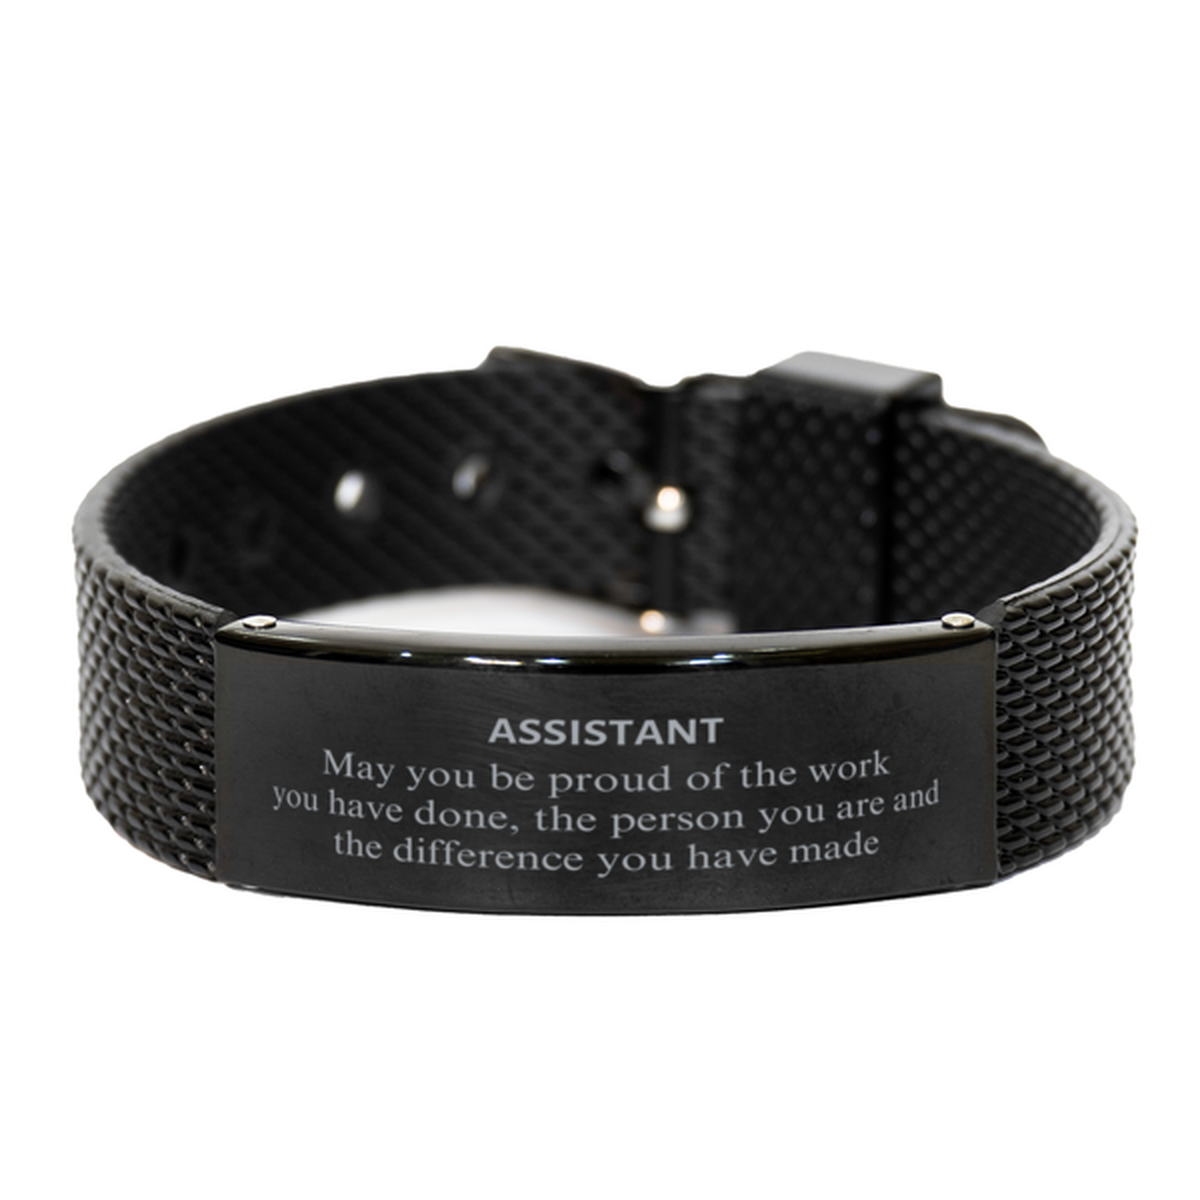 Assistant May you be proud of the work you have done, Retirement Assistant Black Shark Mesh Bracelet for Colleague Appreciation Gifts Amazing for Assistant